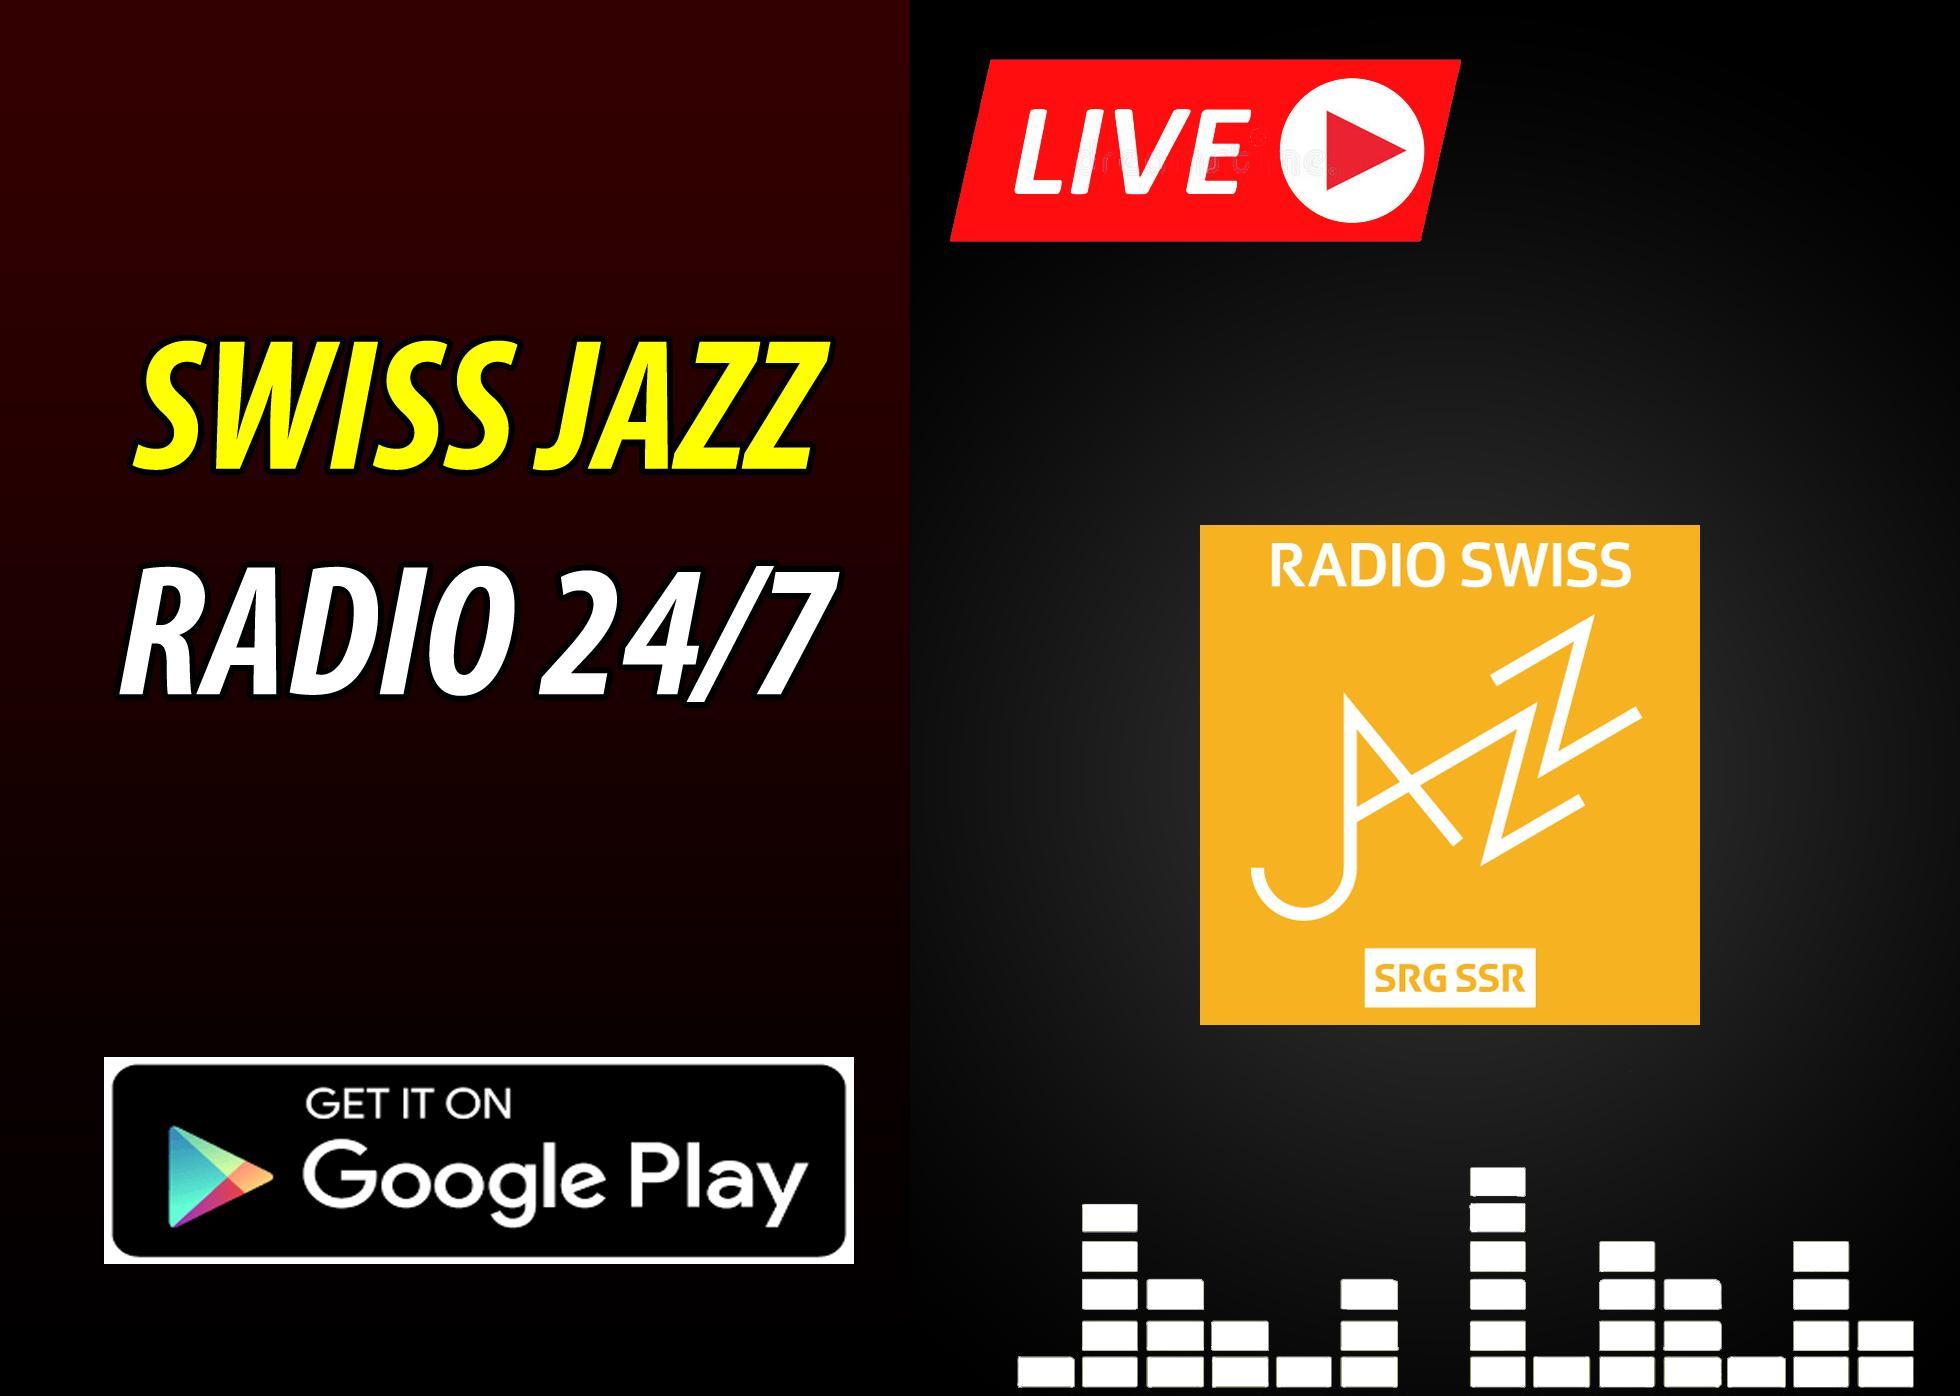 Radio Swiss Jazz 24/7 for Android - APK Download